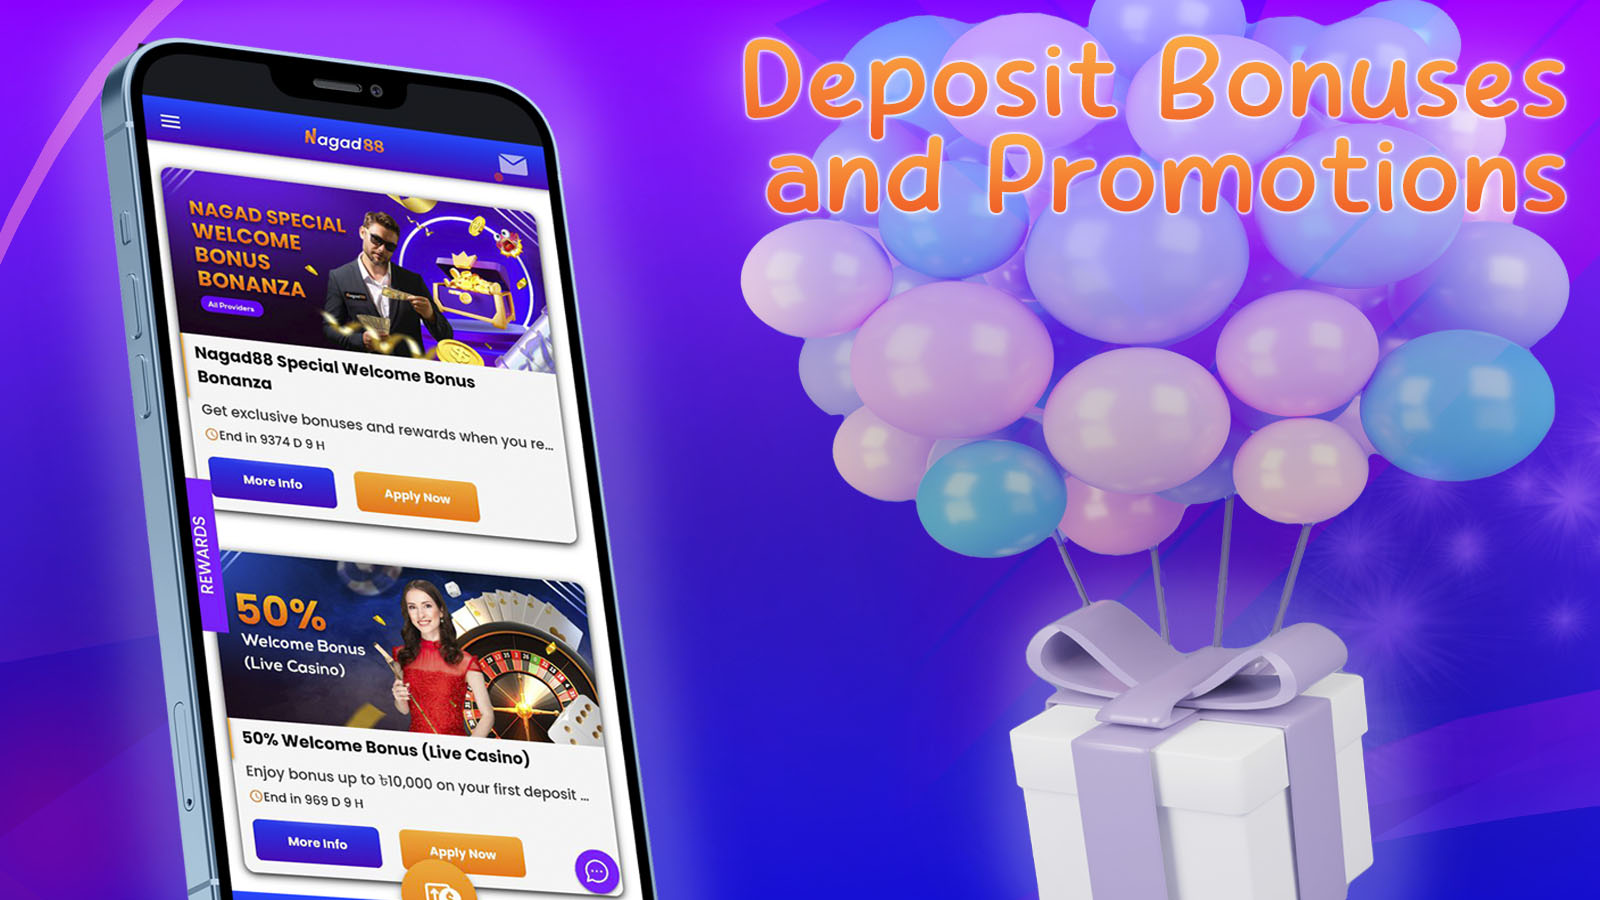 Offering players deposit bonuses and promotions